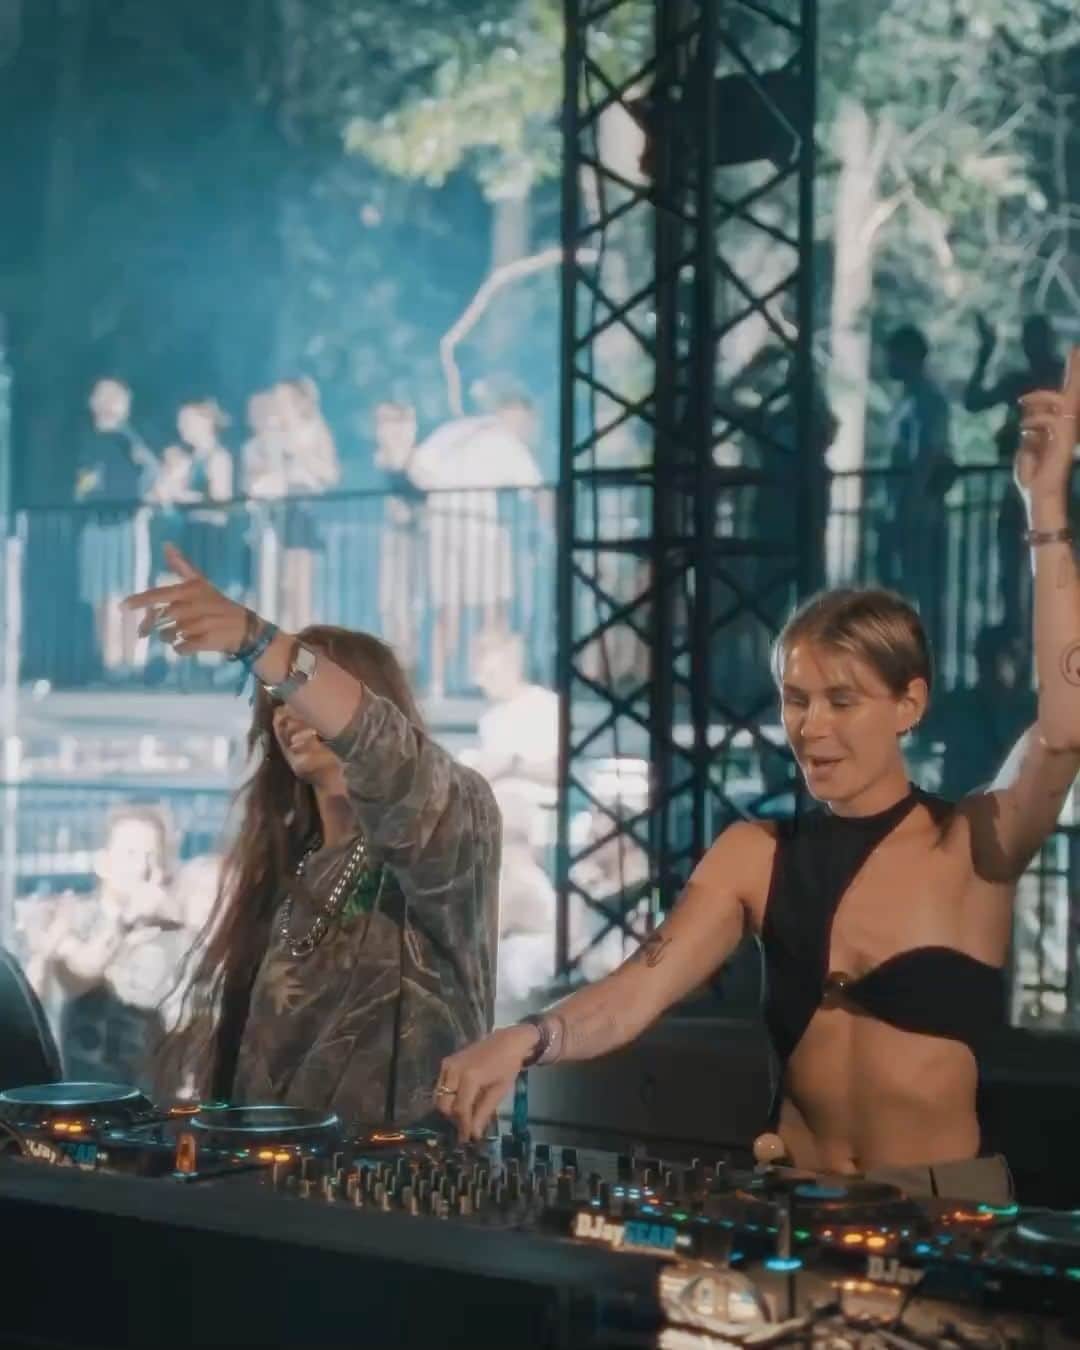 Spinnin' Recordsのインスタグラム：「The amazing @ki.slash.ki closed Draaimolen Festival 2023 with the help of the iconic @sevdaliza_ 🔥 The duo played a Spinnin' classic from 2019: @moguai - ACIIID (@krydermusic x @bennybenassi Remix), and the crowd went wild!!」